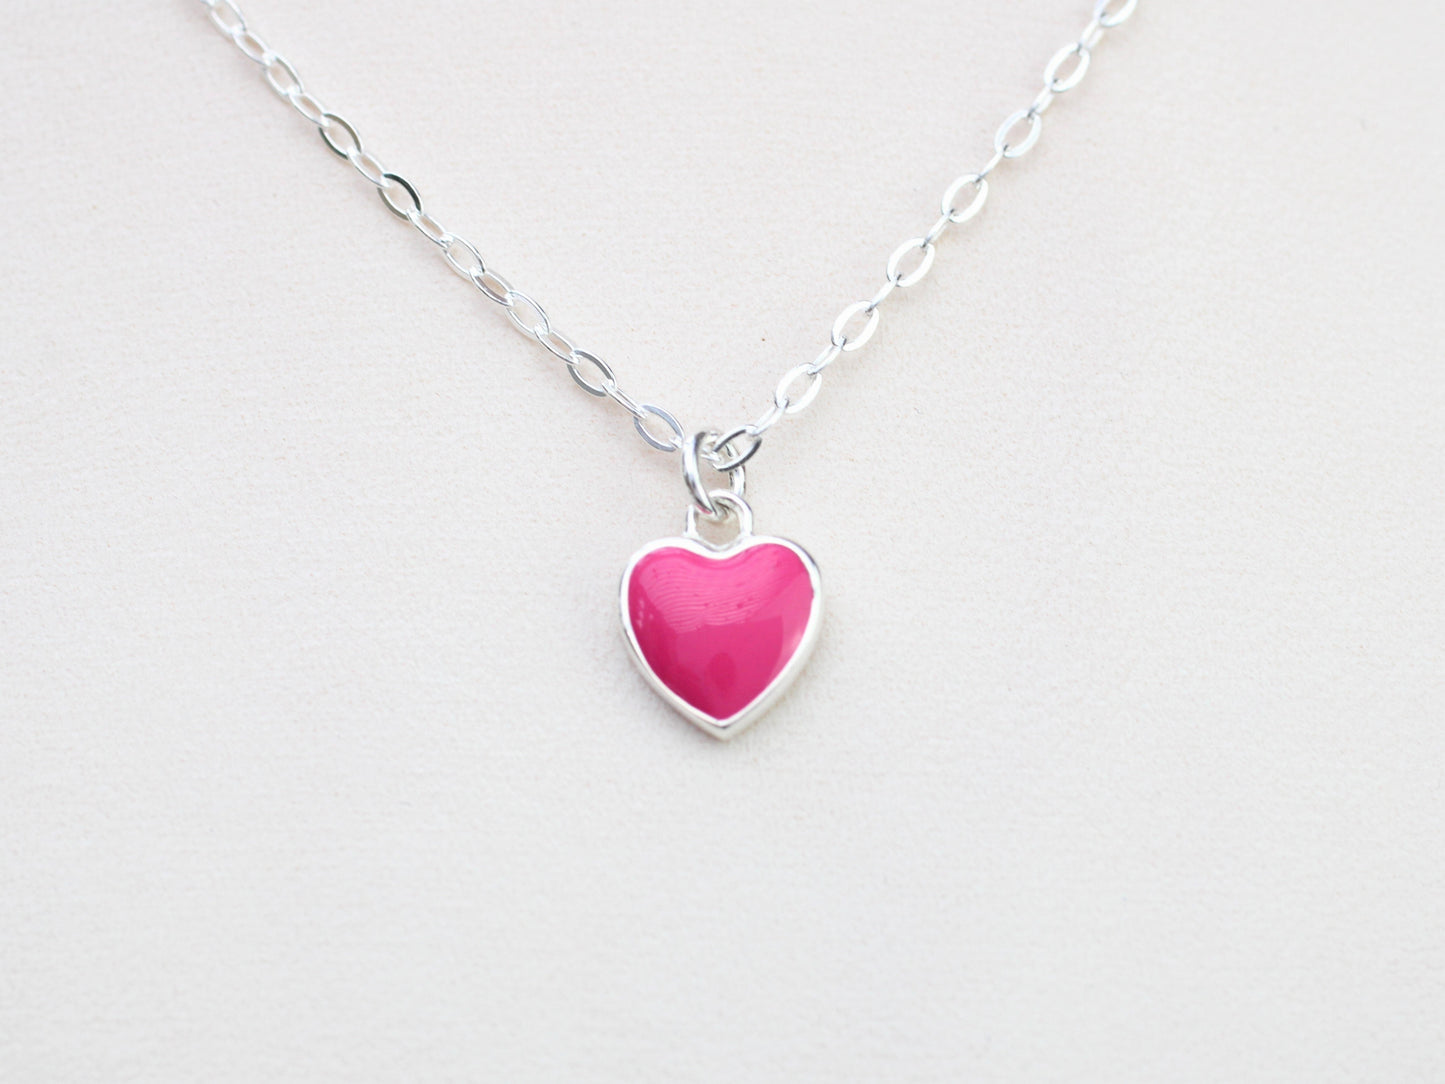 Pink heart charm necklace.